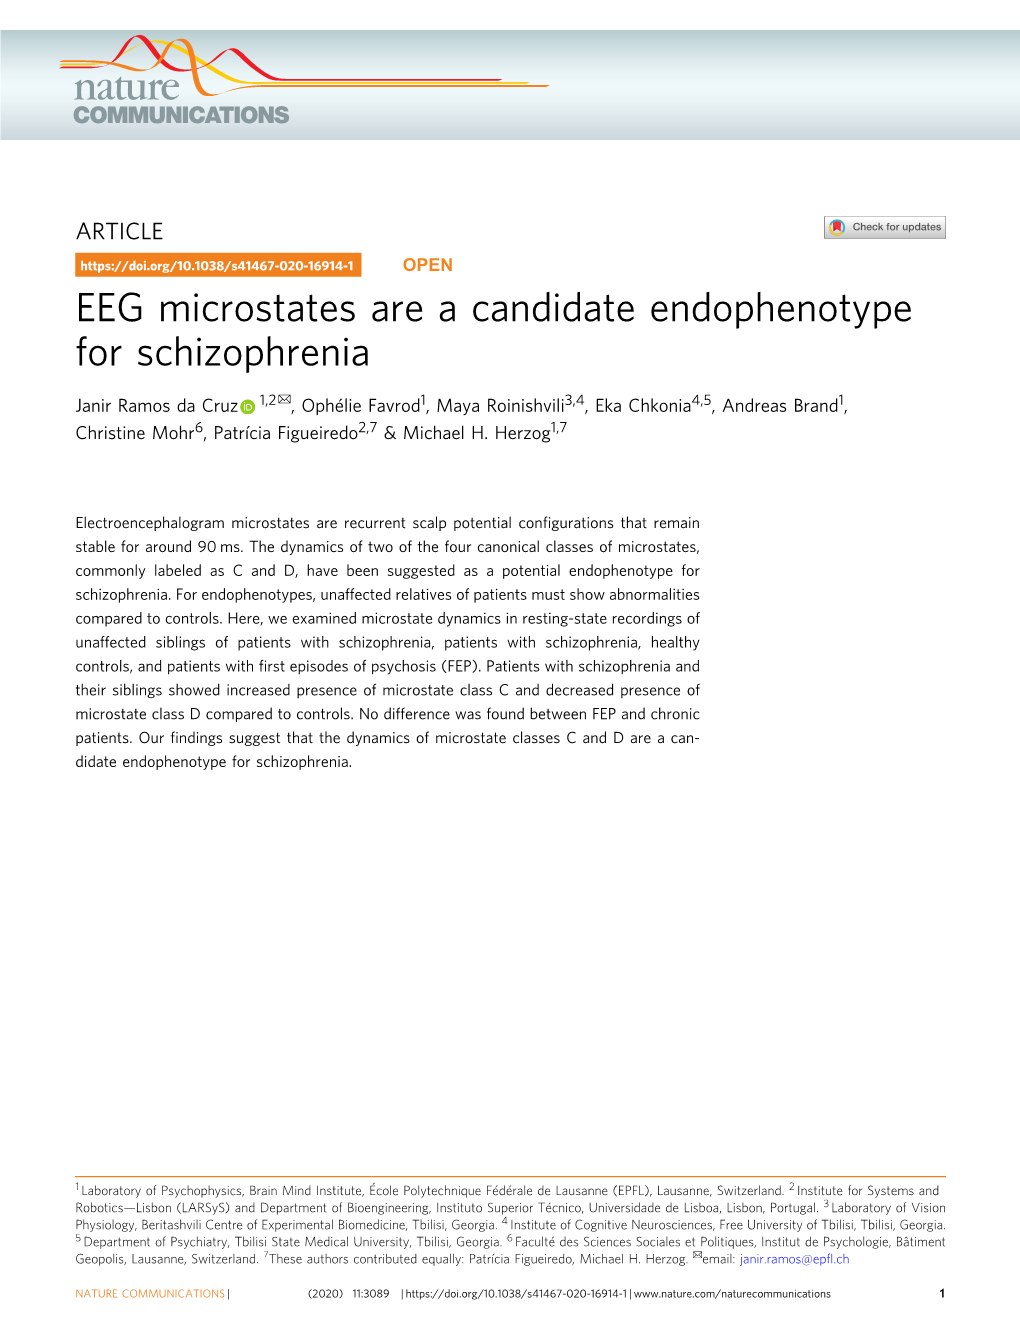 EEG Microstates Are a Candidate Endophenotype For